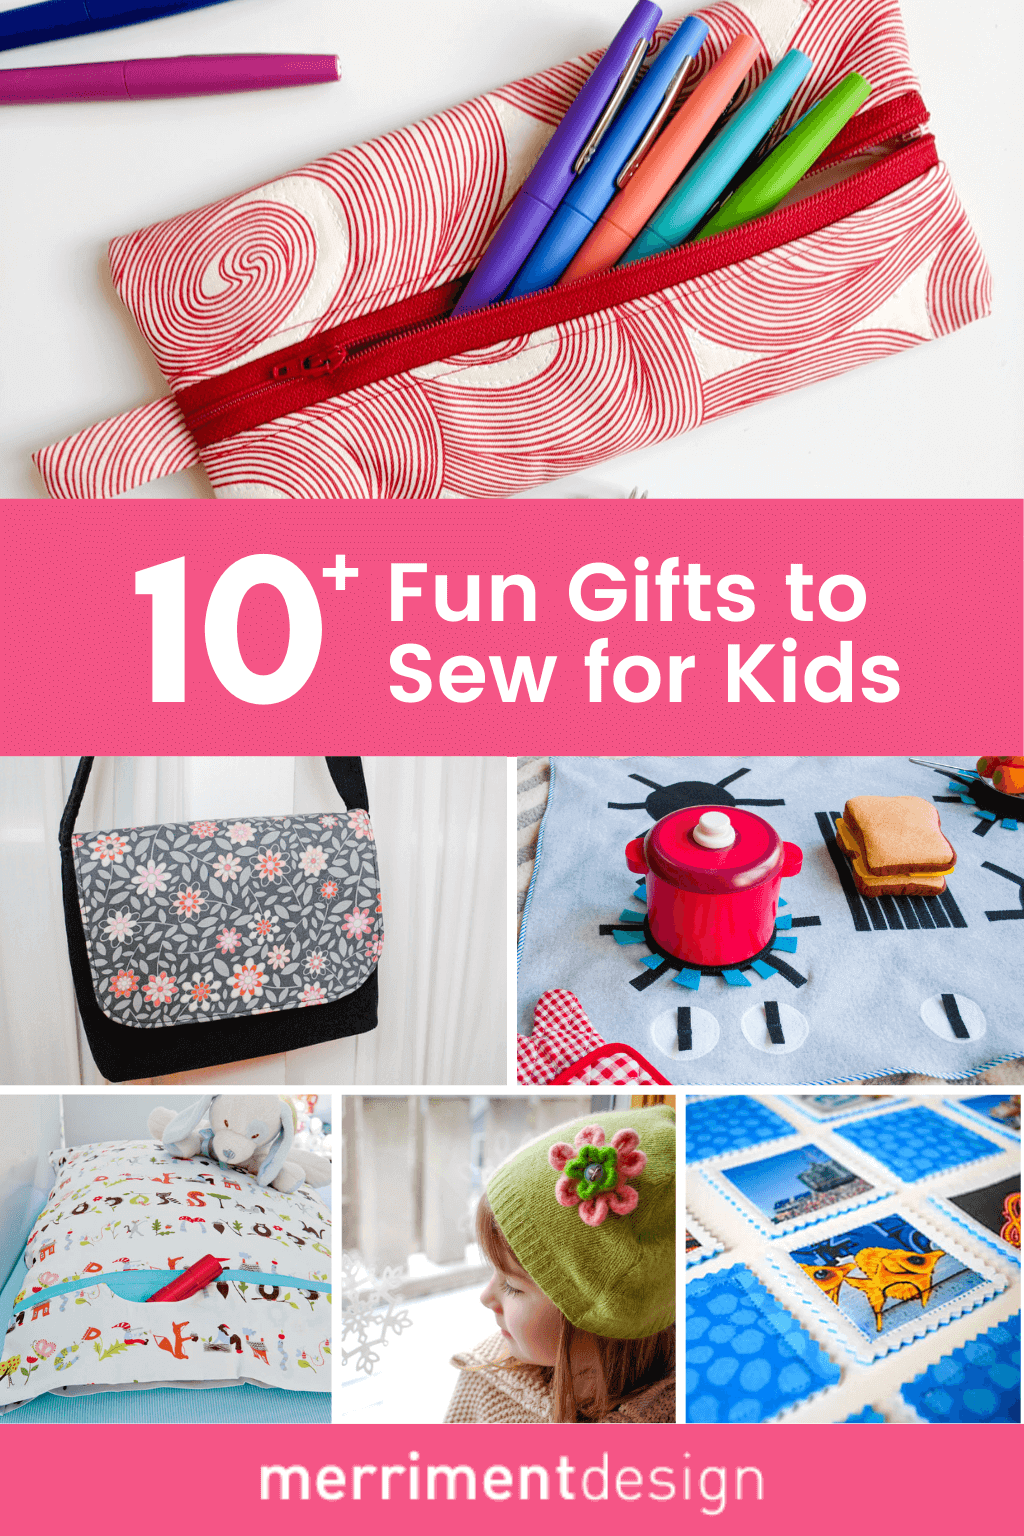 https://www.merrimentdesign.com/images/Fun-Gifts-To-Sew-for-Kids.png